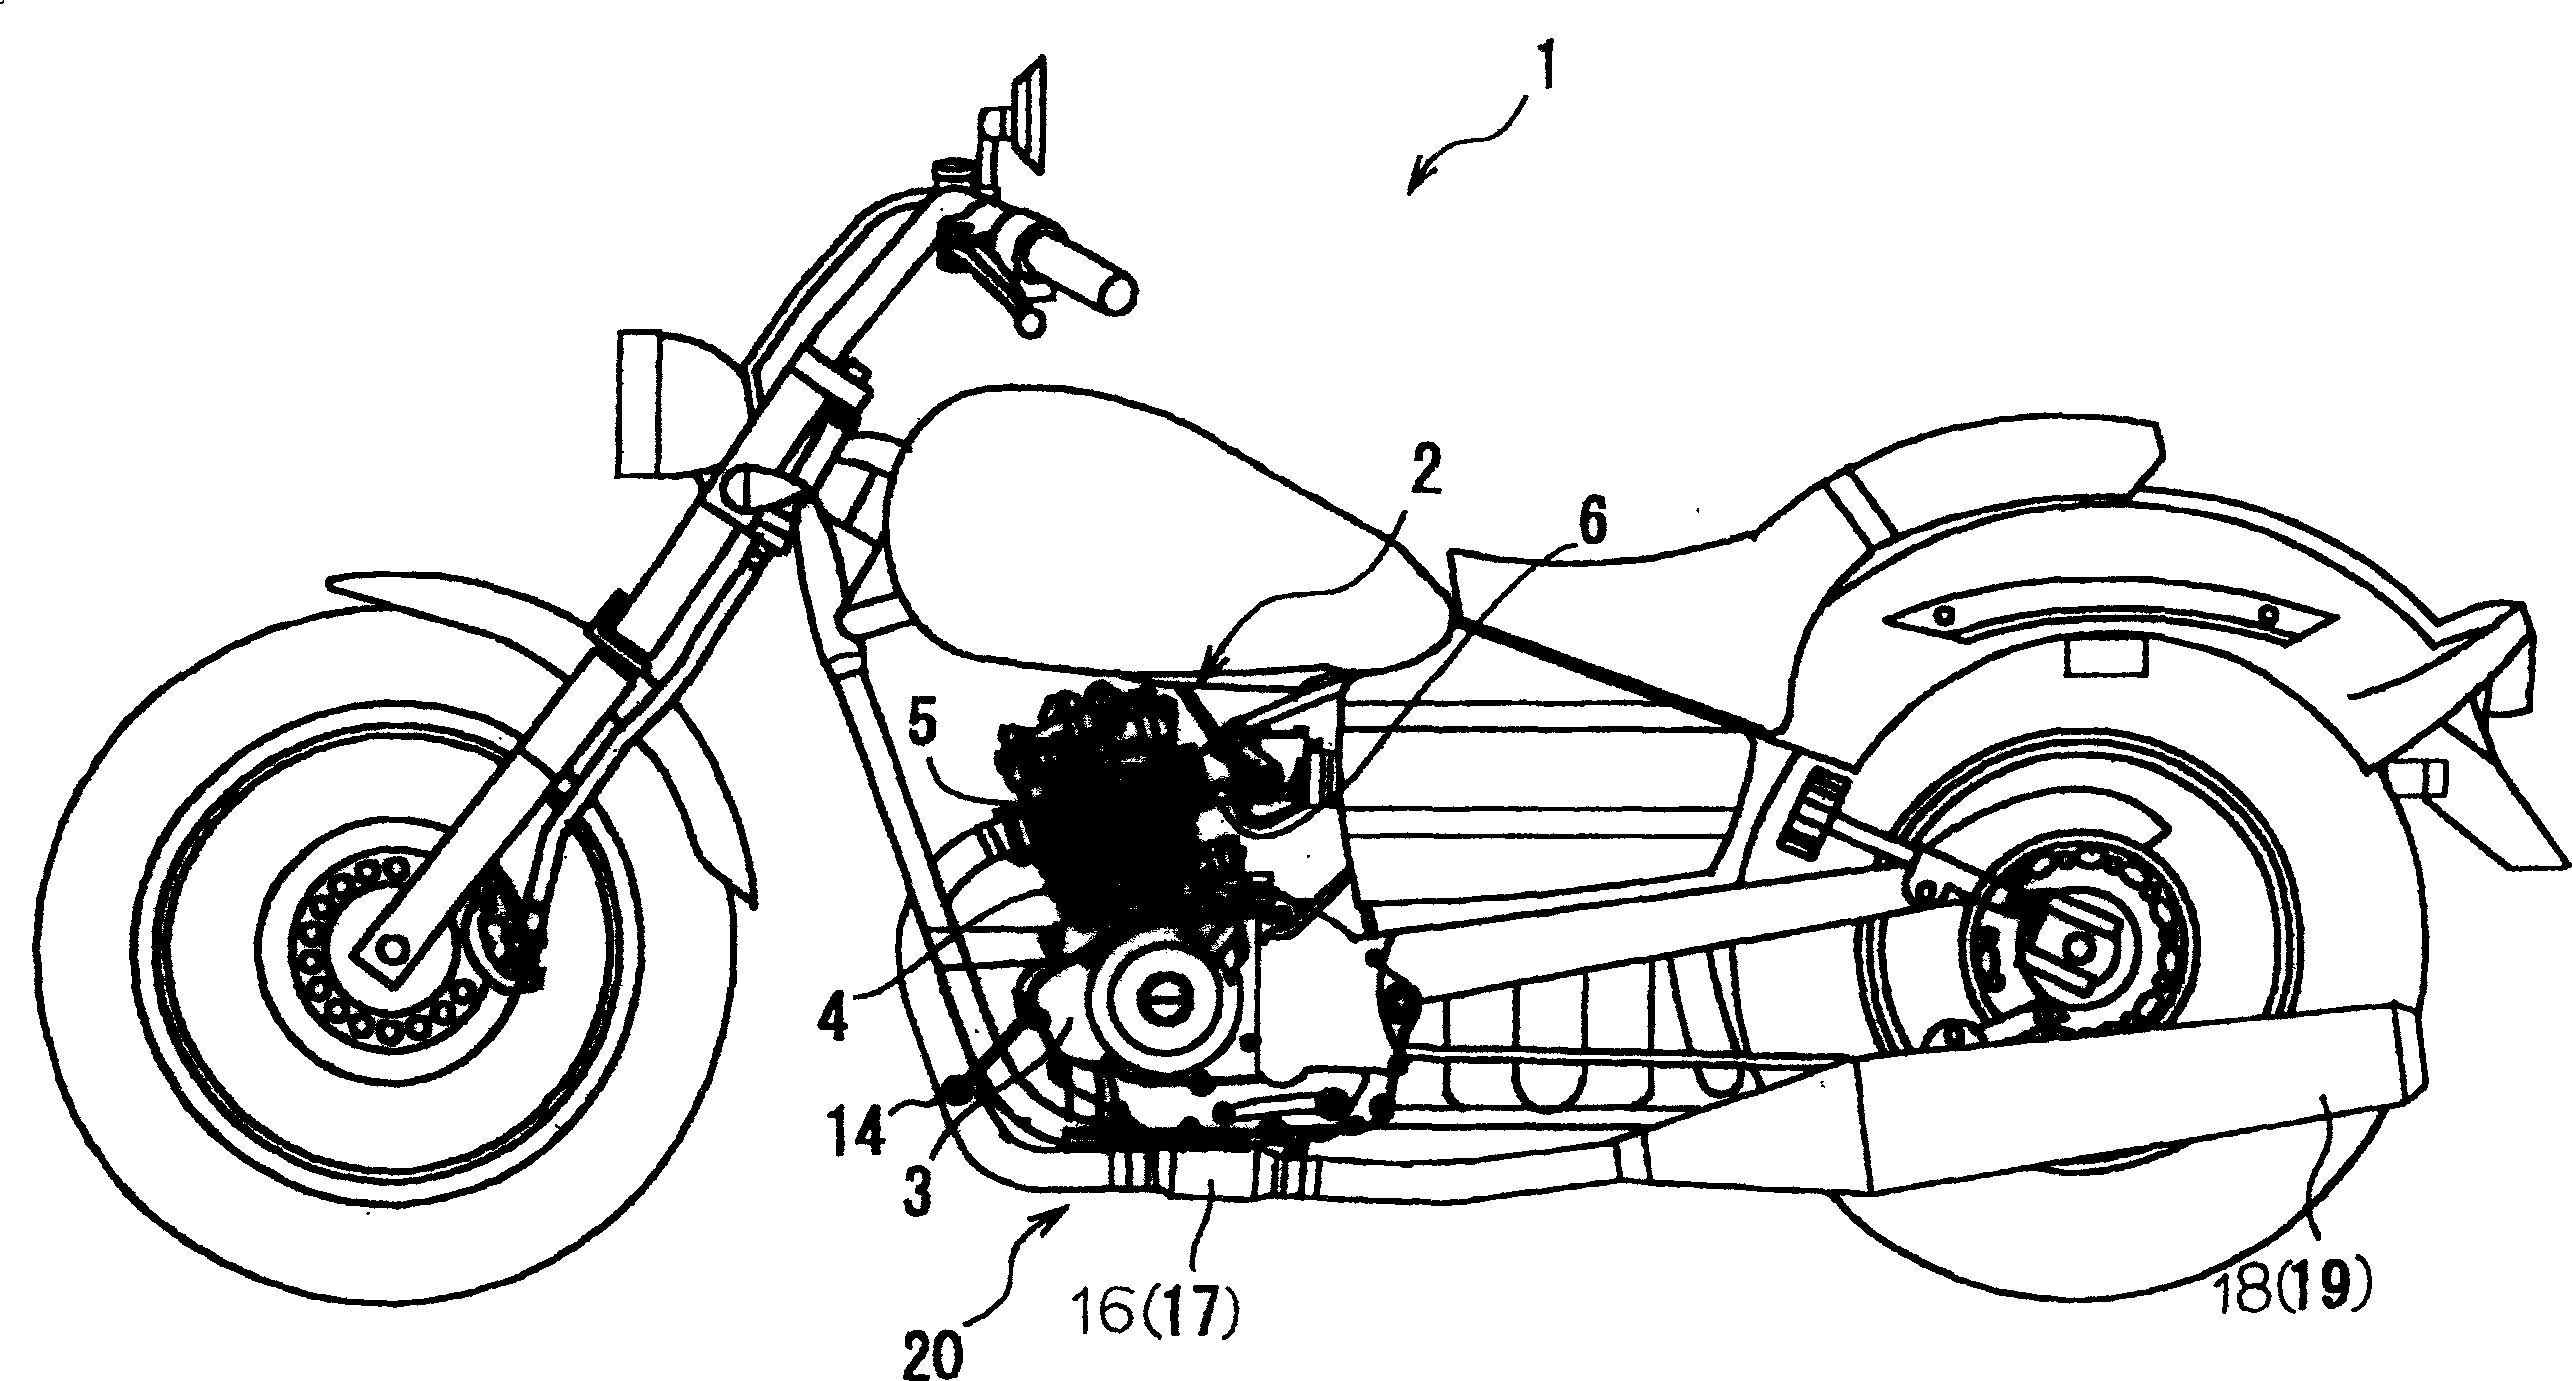 Exhaust pipe structure of automatic two wheel vehicle